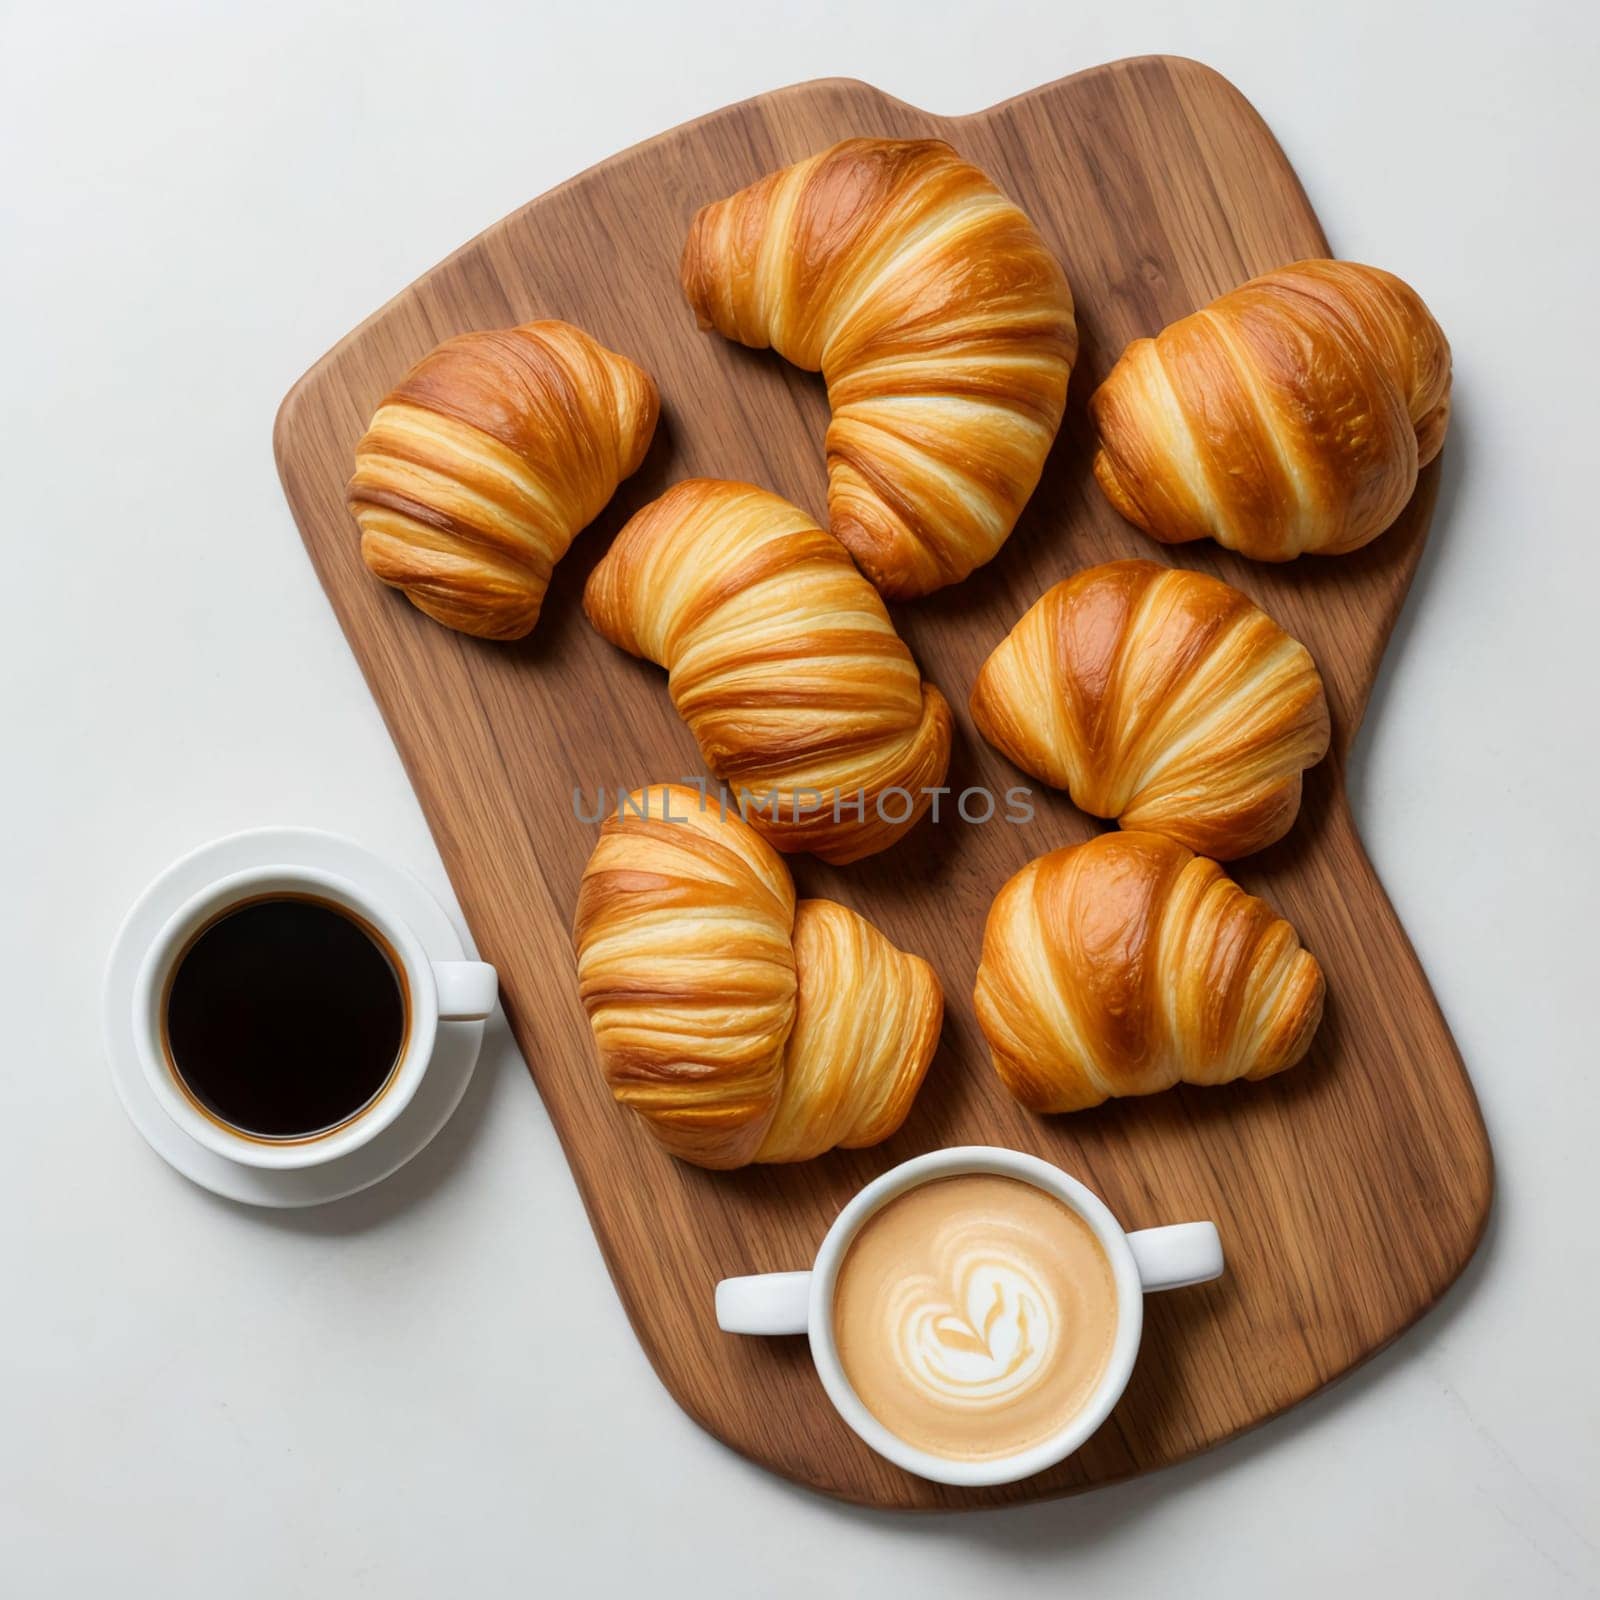 Freshly baked croissants on a wooden board next to a cup of hot coffee on a white background